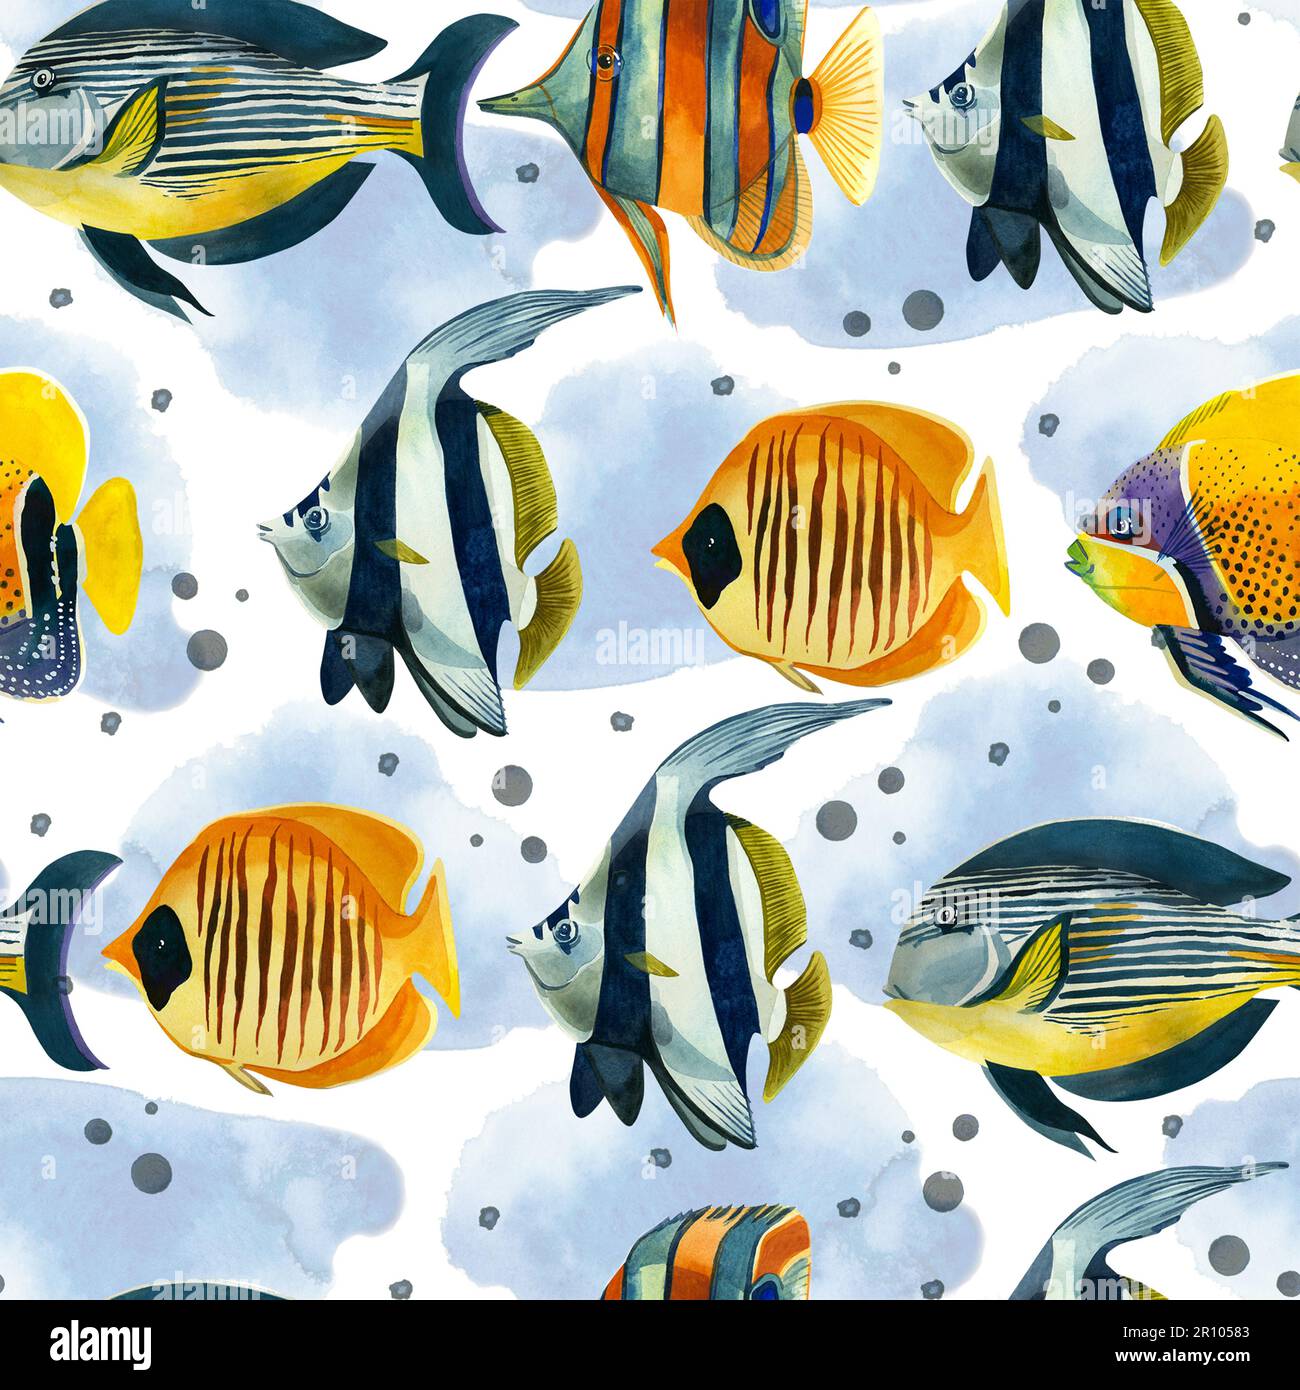 Seamless pattern. Tropical fishes of bright colors, pink stars, corals and blue spots, hand-drawn in watercolor on a white background. Suitable for pr Stock Photo